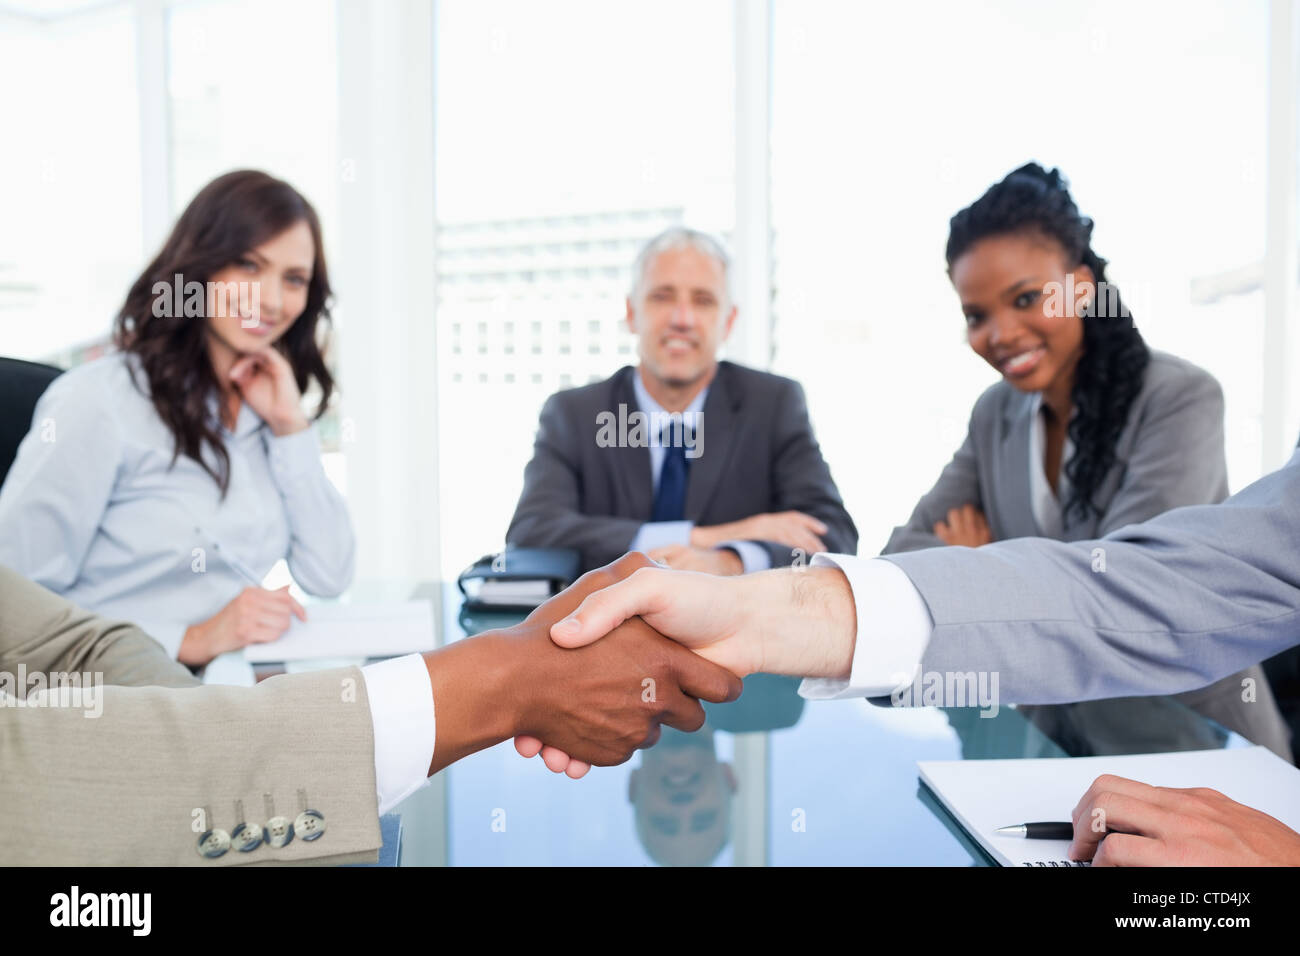 Two executives shaking hands during a meeting Stock Photo